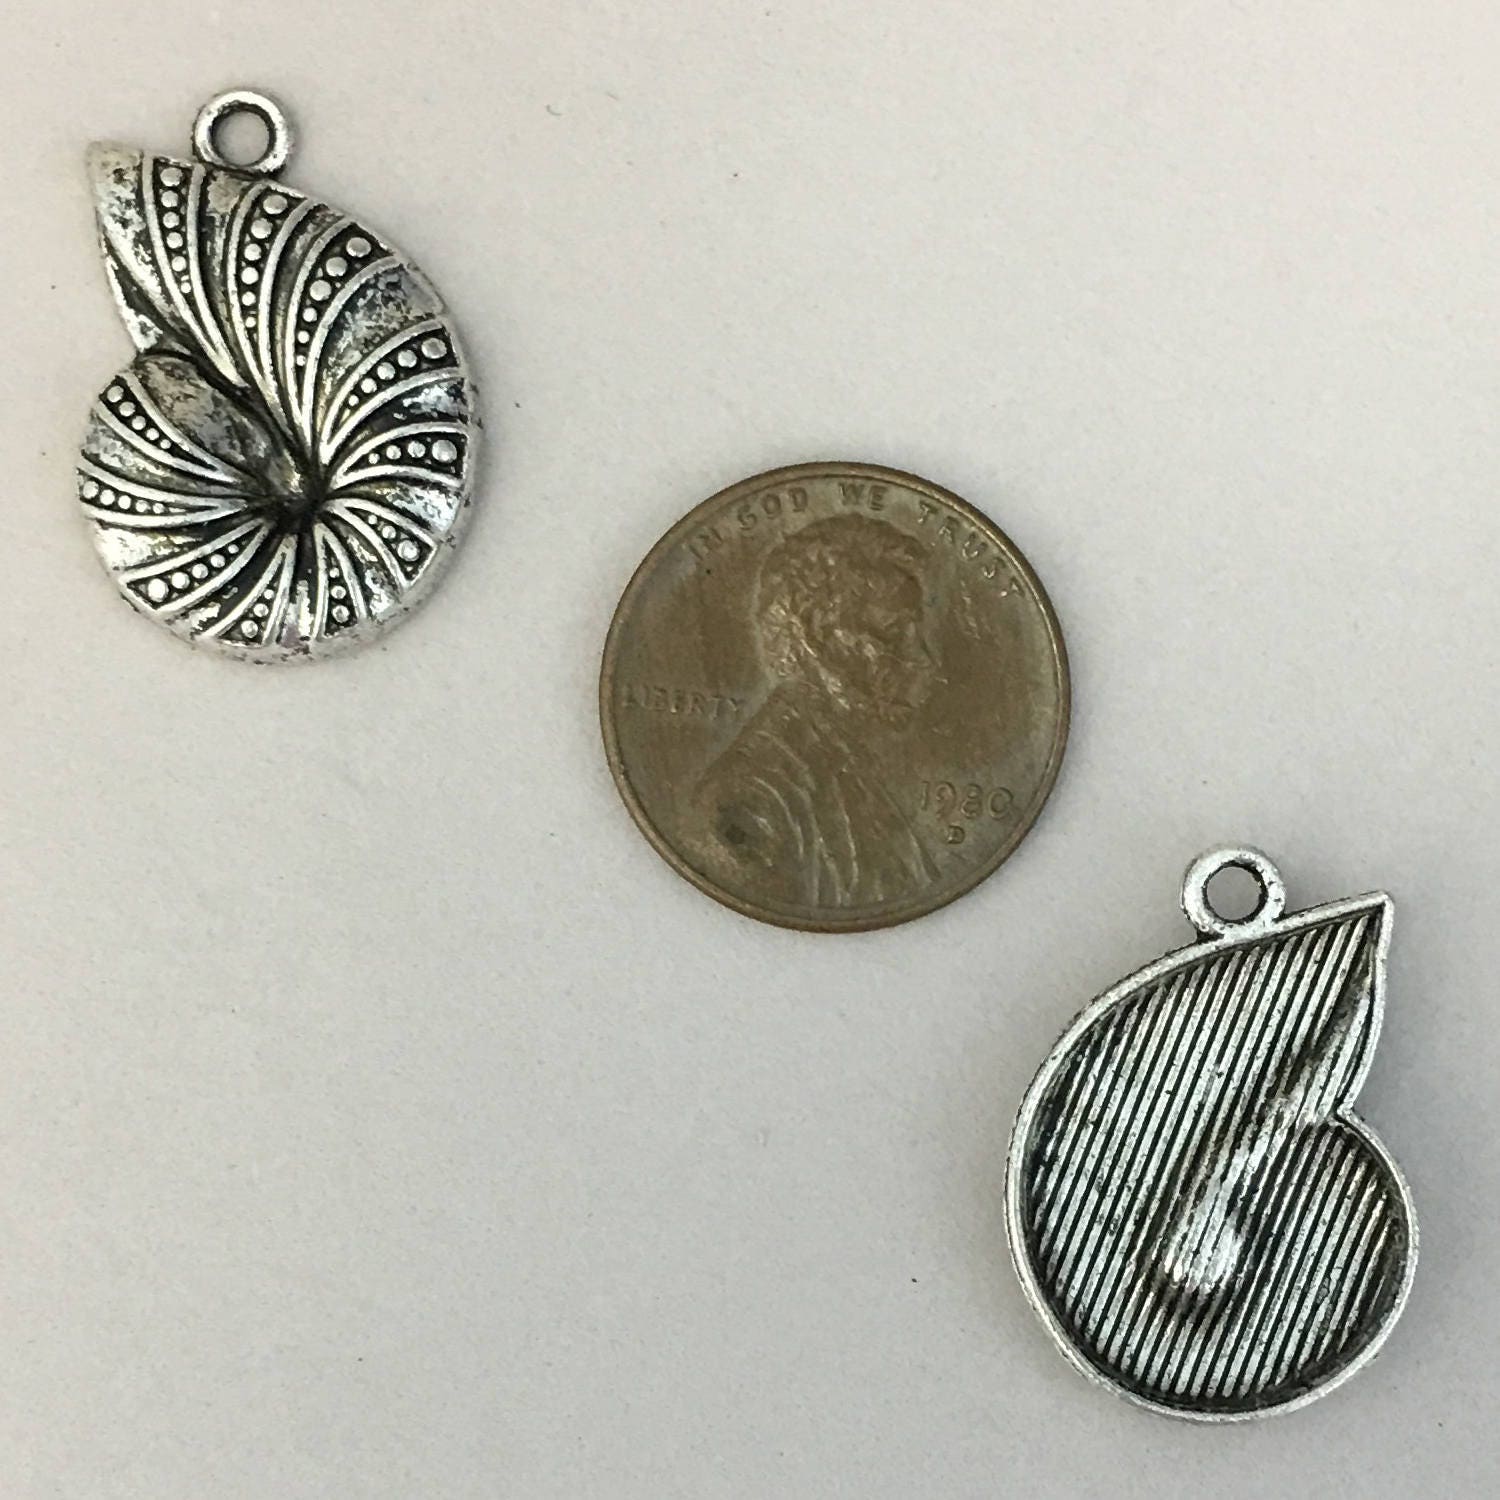 6 Nautilus Shell Charm Silver by TIJC SP0575 | Etsy